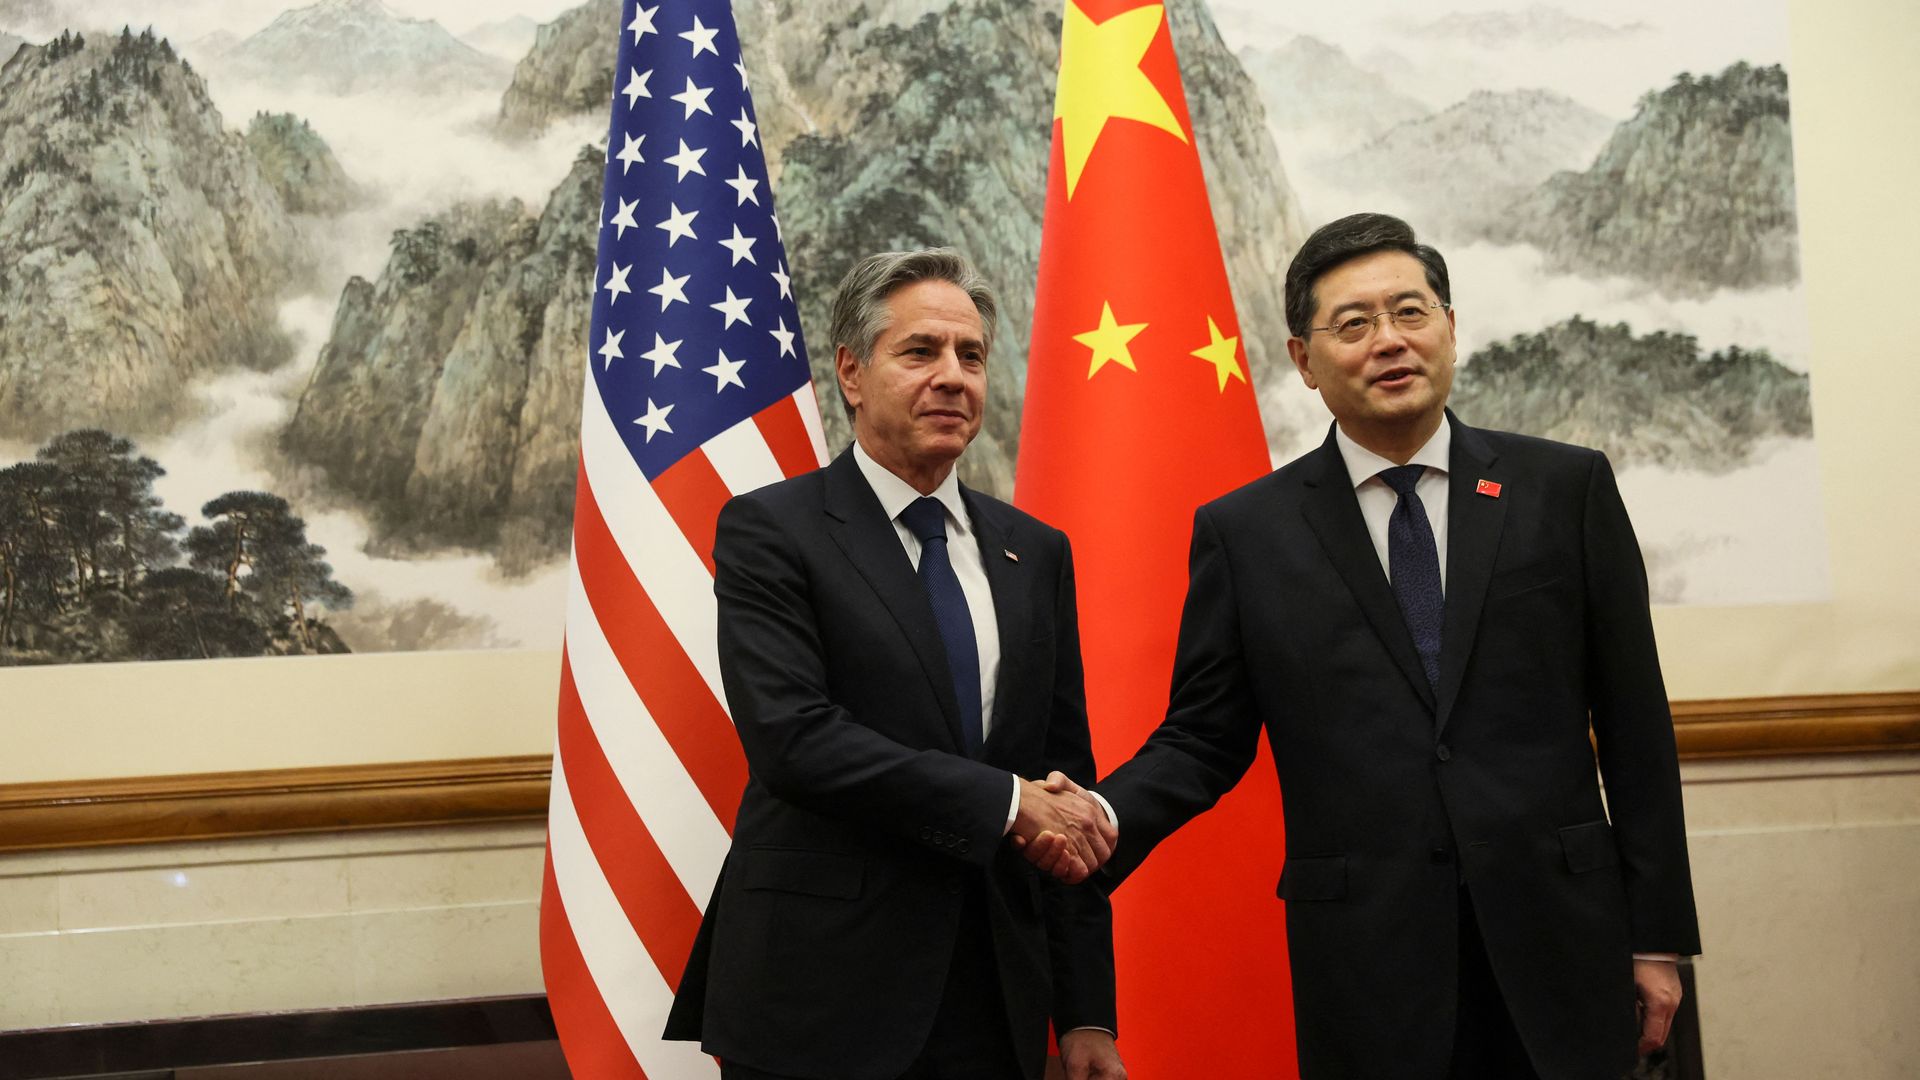 US Secretary of State Antony Blinken (L) and China's Foreign Minister Qin Gang shake hands ahead of a meeting at the Diaoyutai State Guesthouse in Beijing on June 18, 2023. (Photo by LEAH MILLIS / POOL / AFP) (Photo by LEAH MILLIS/POOL/AFP via Getty Images)